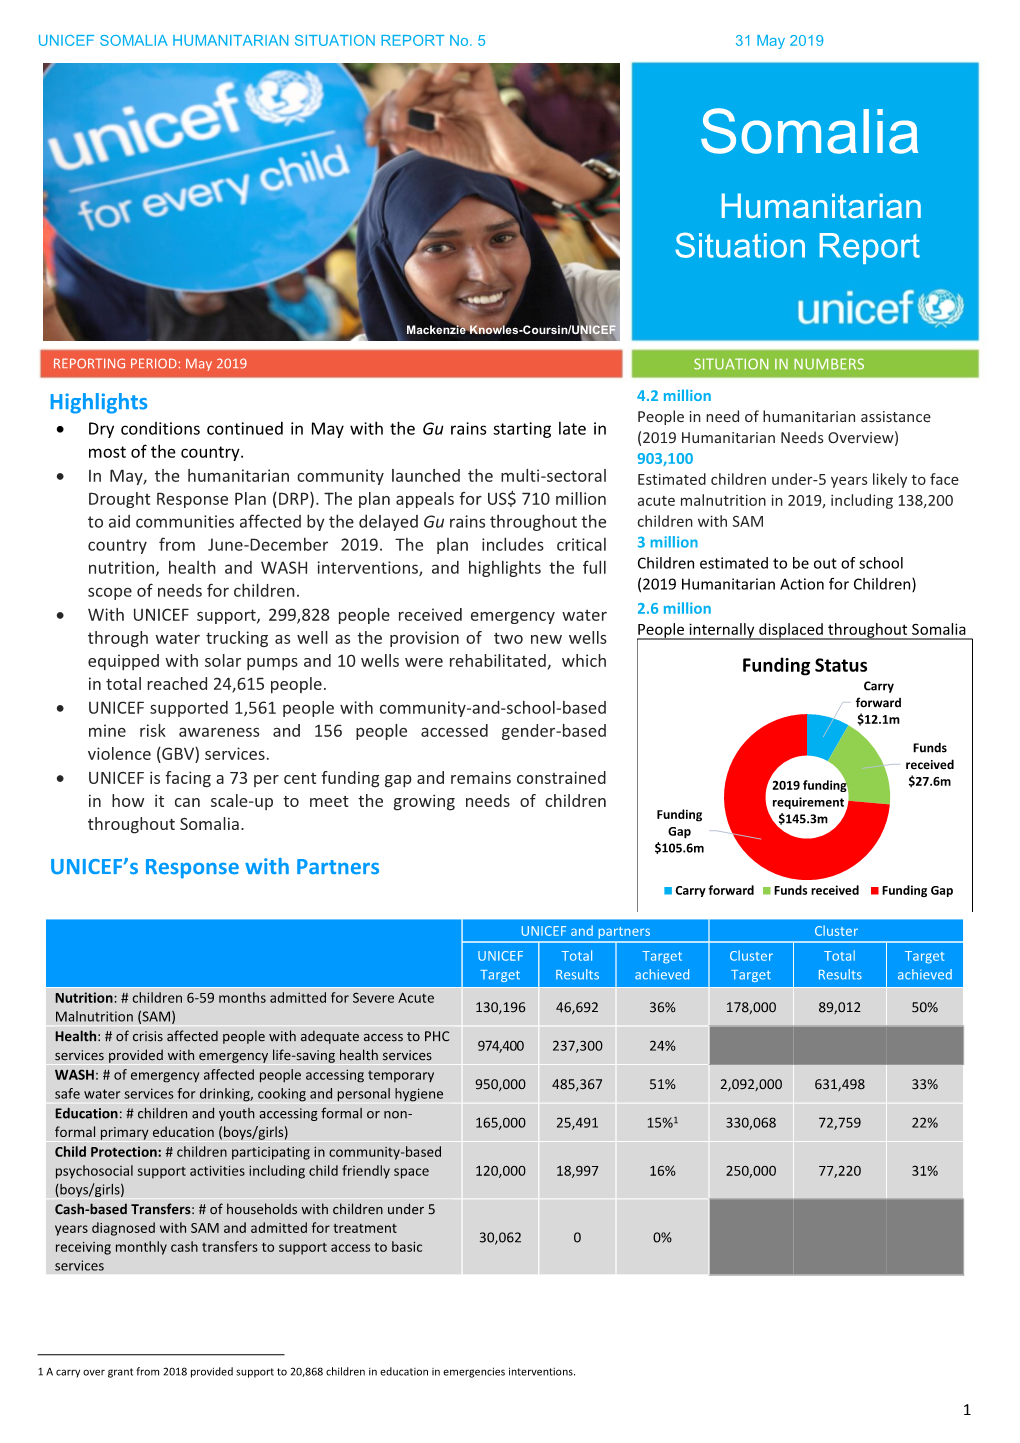 UNICEF Somalia Humanitarian Situation Report March 2019